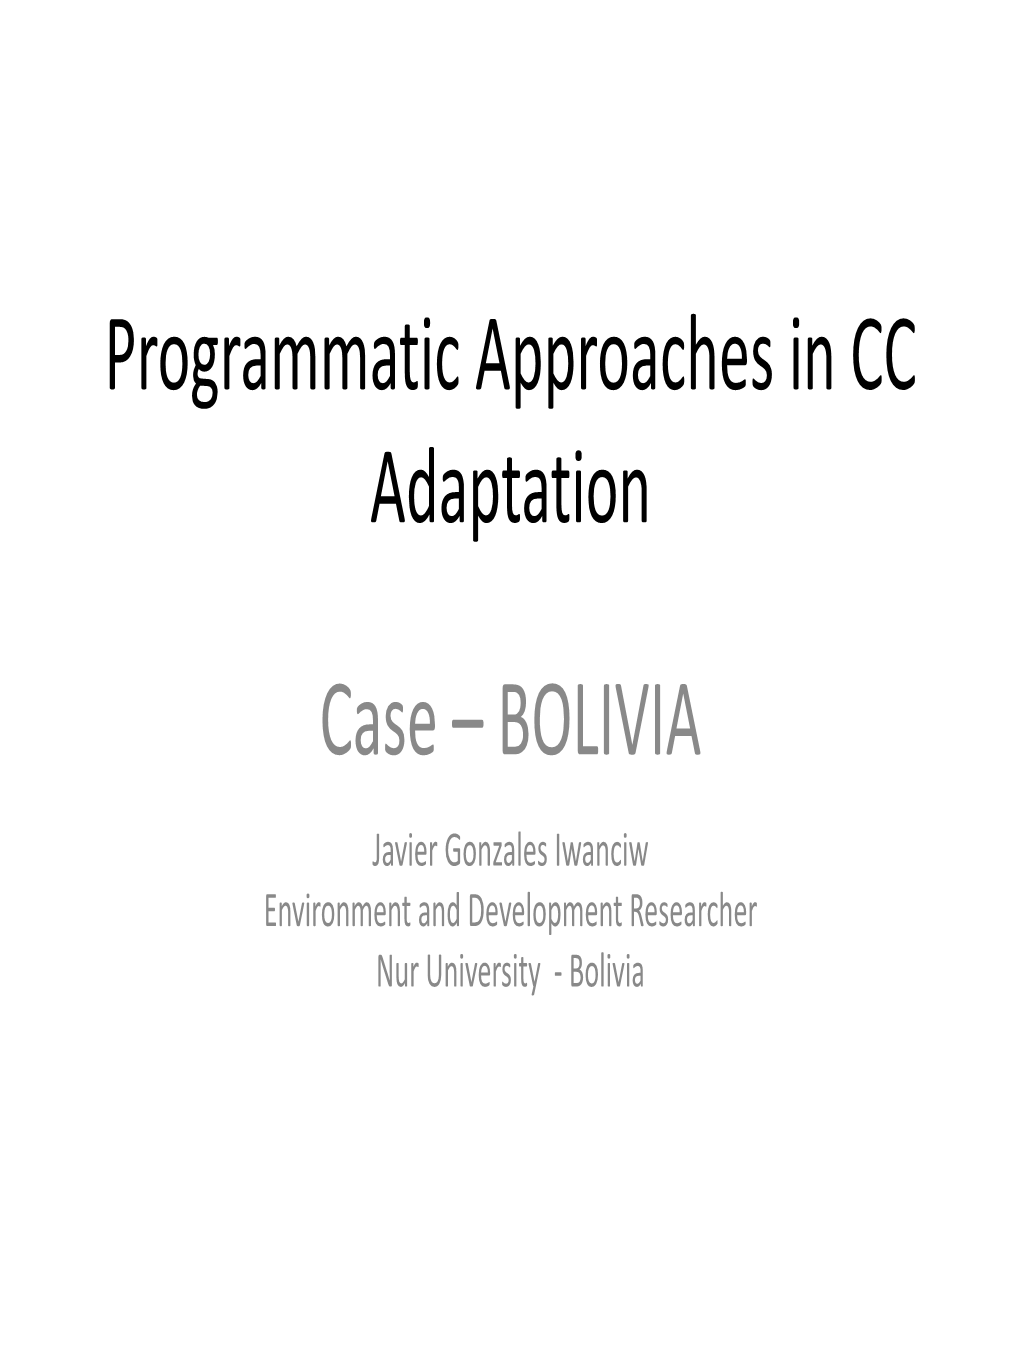 Programmatic Approaches in CC Adaptation